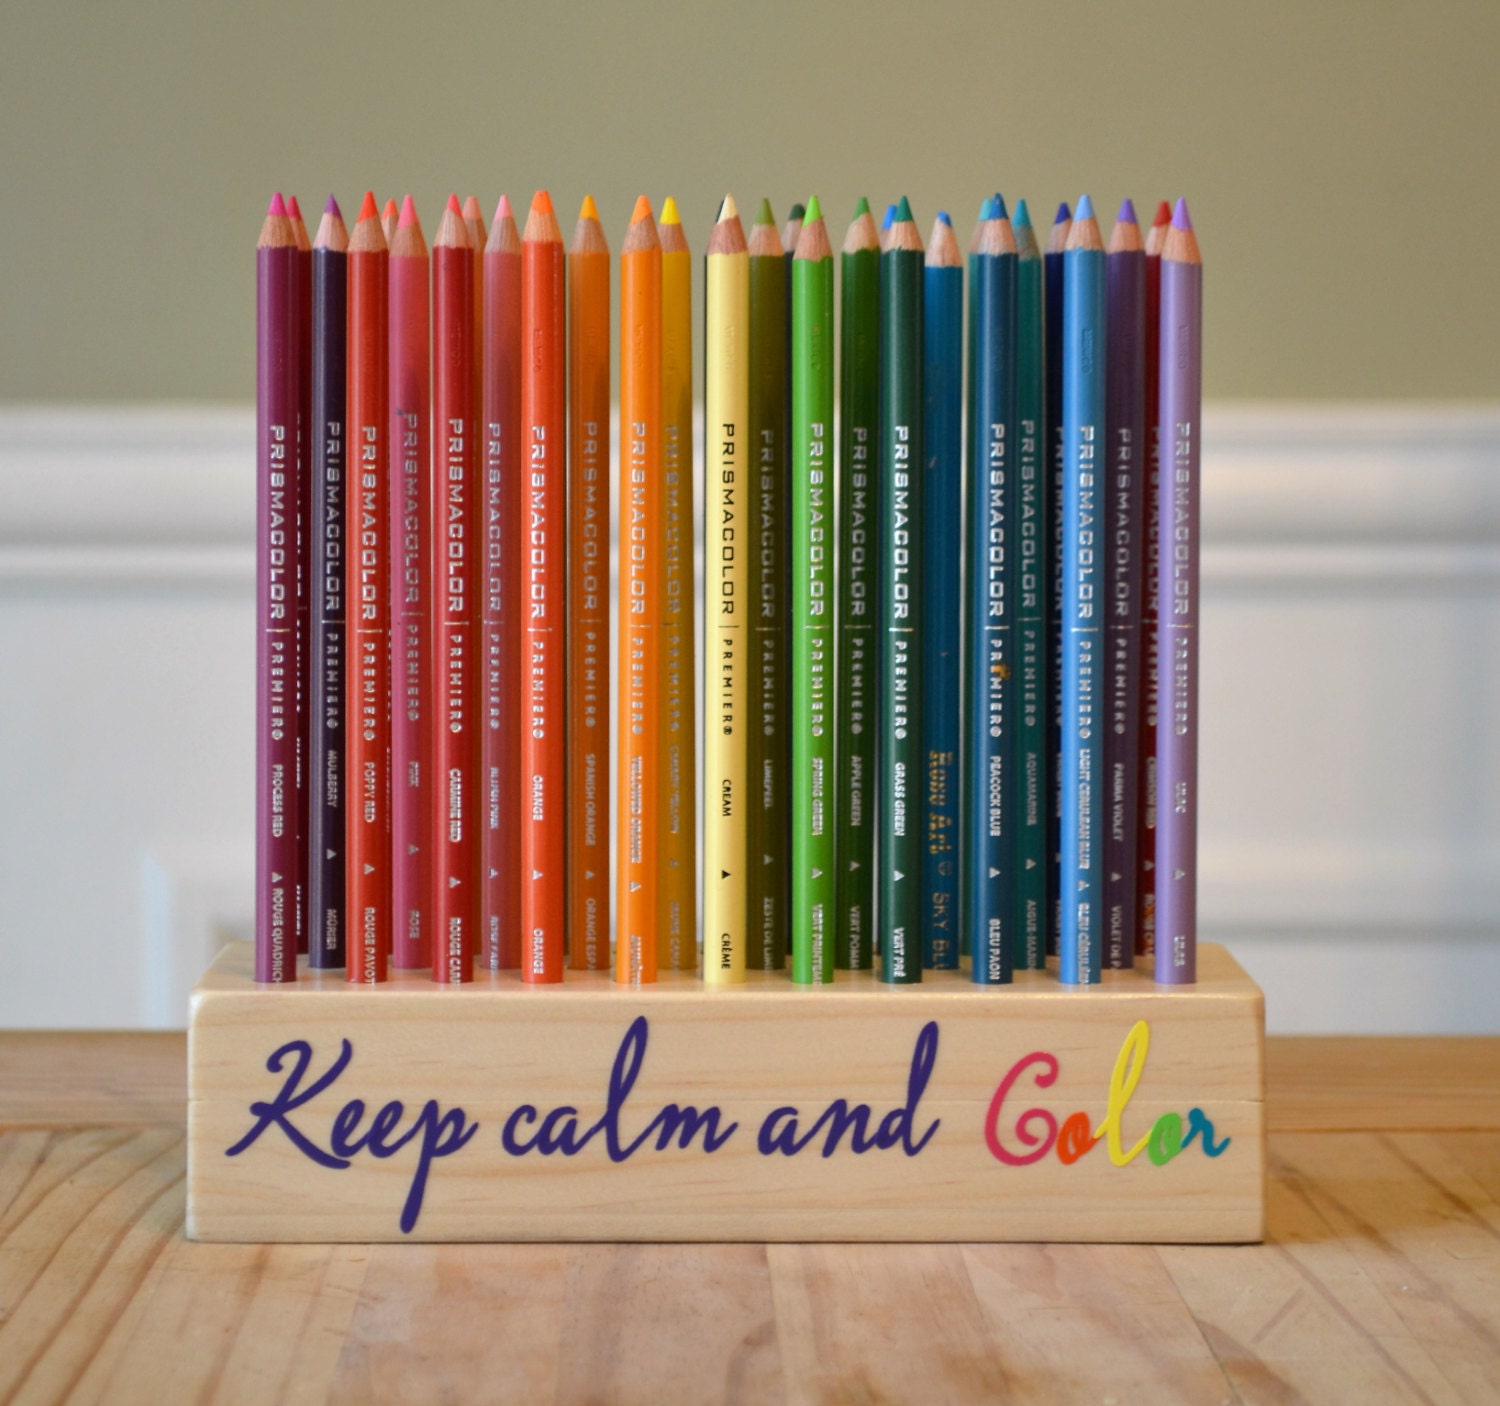 Download Wooden Colored Pencil Organizer Keep Calm and Color pencil